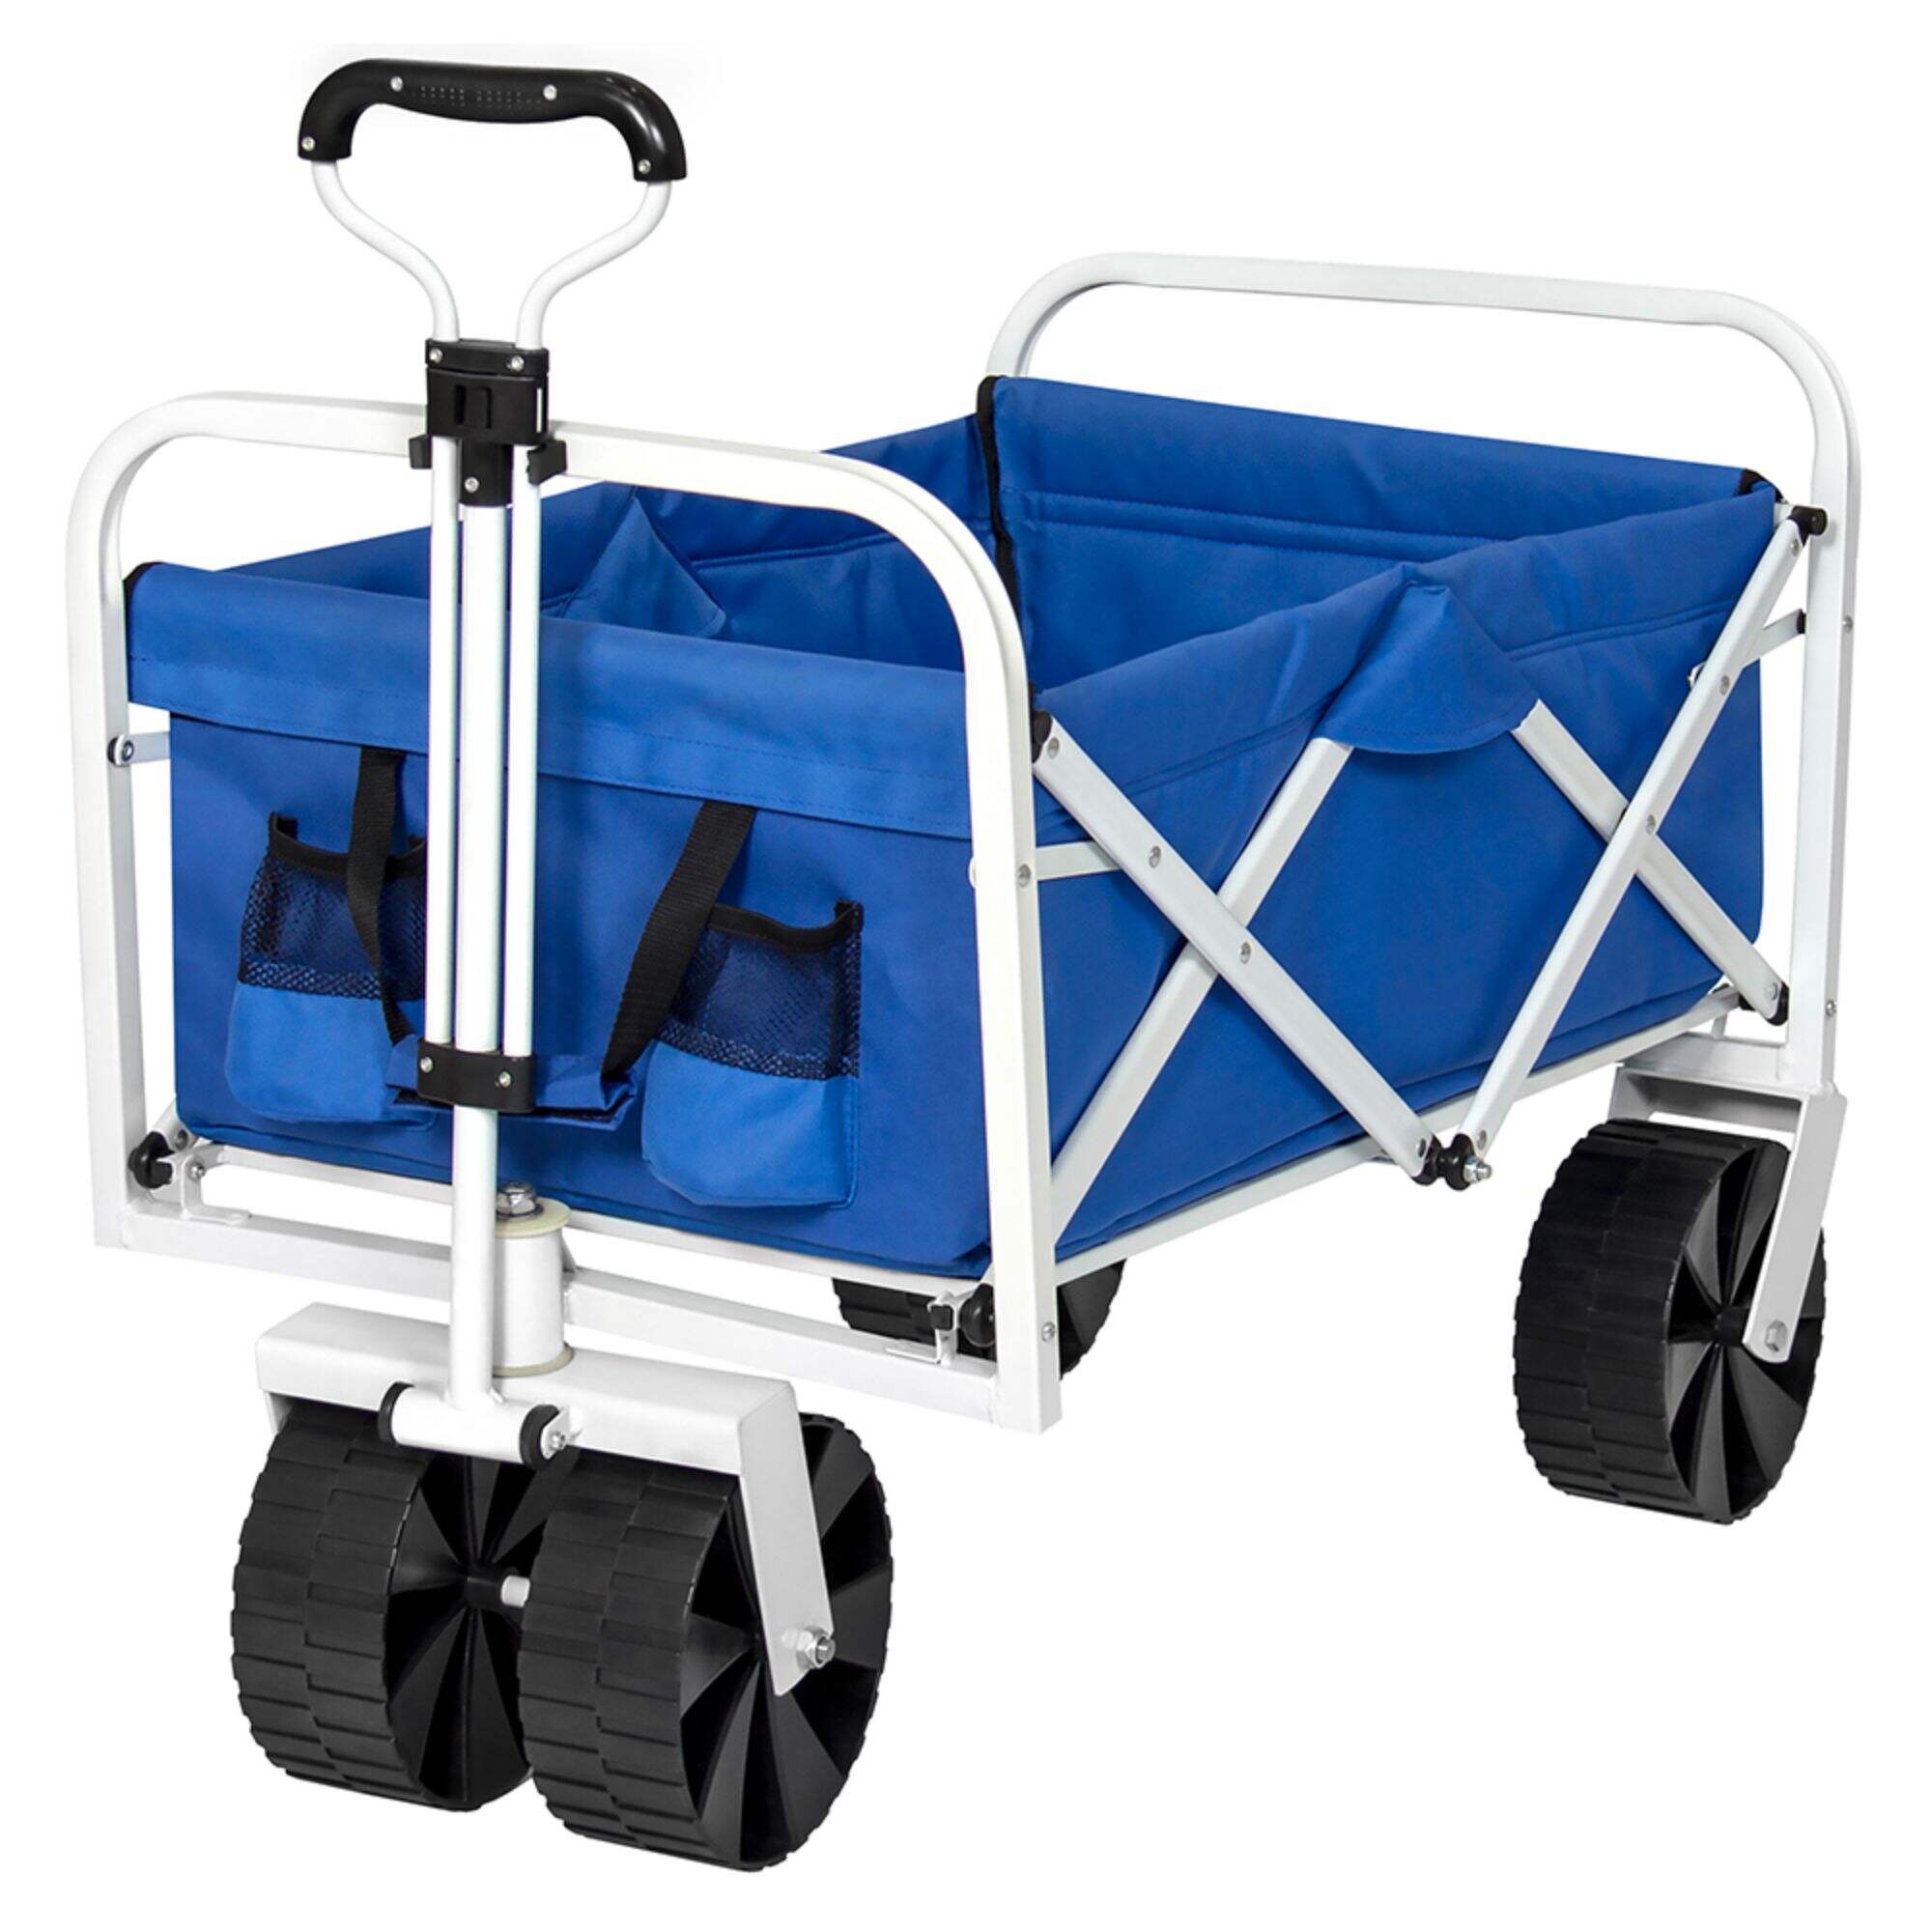 GT1806 Collapsible Folding Wagon, Beach Wagon Cart, with Big Wheels for Camping Garden Sports